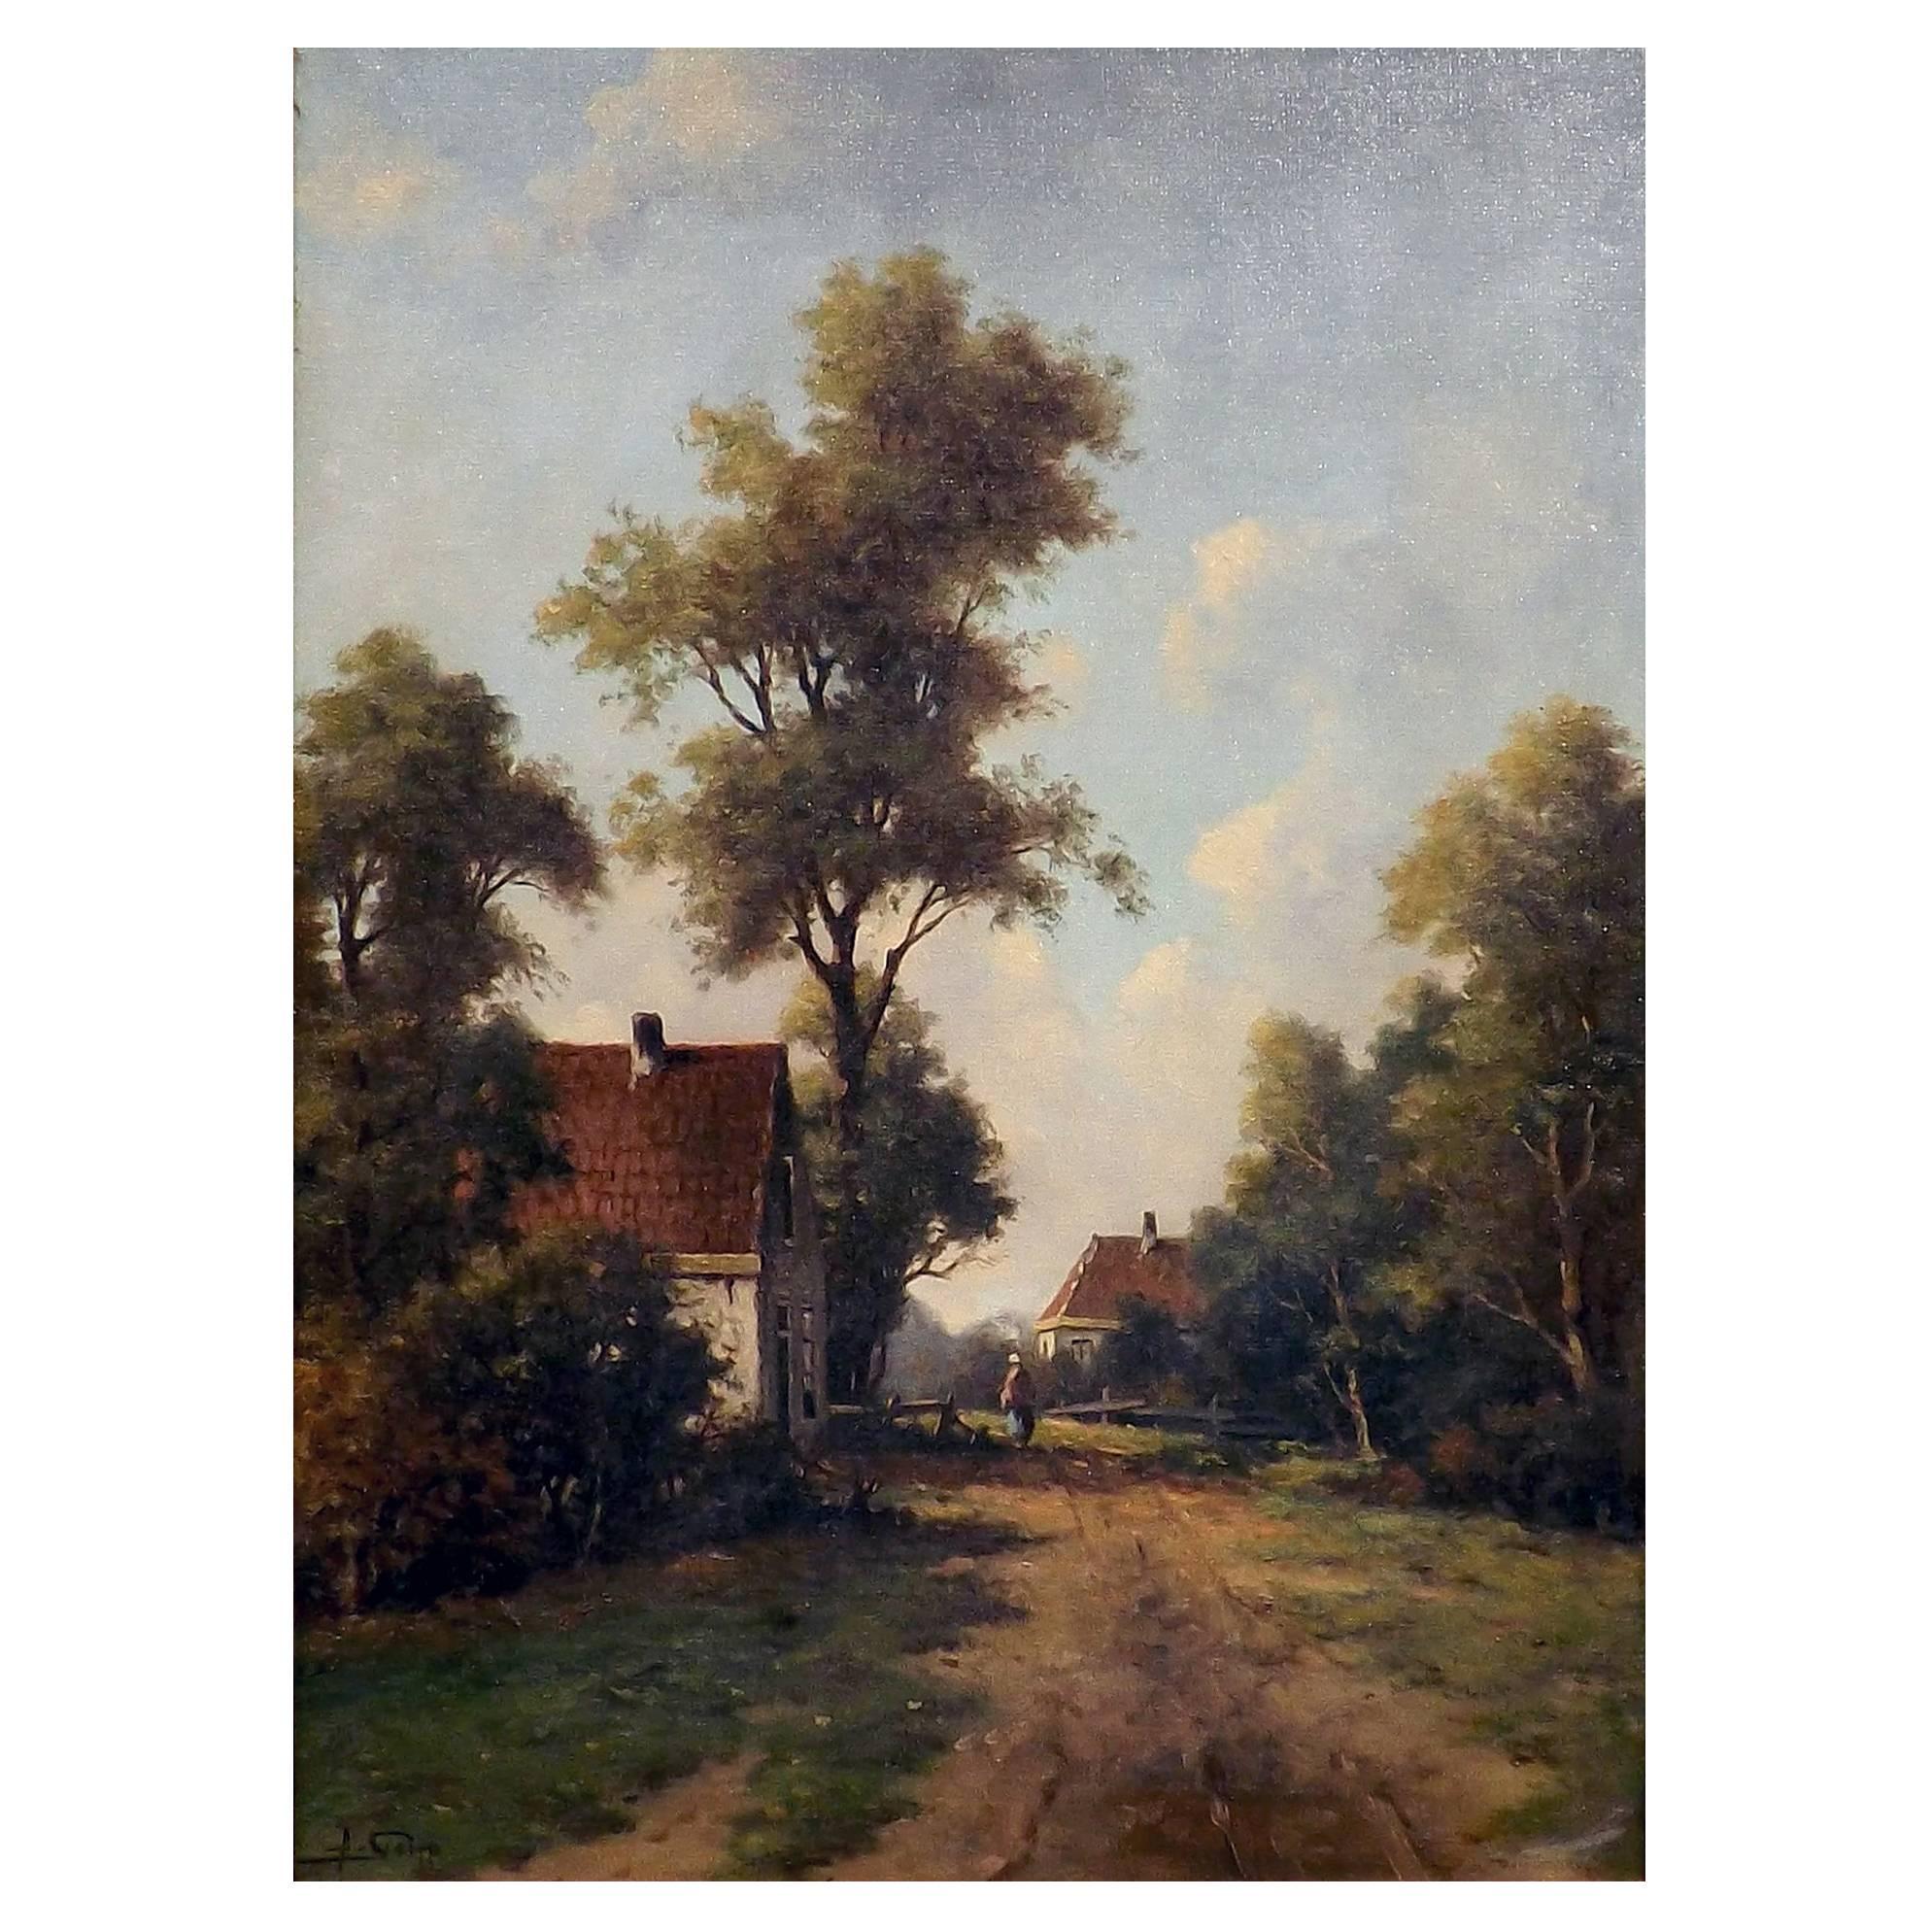 'An Old Country Lane' Painting by Dutch Painter Adriaan Geijp